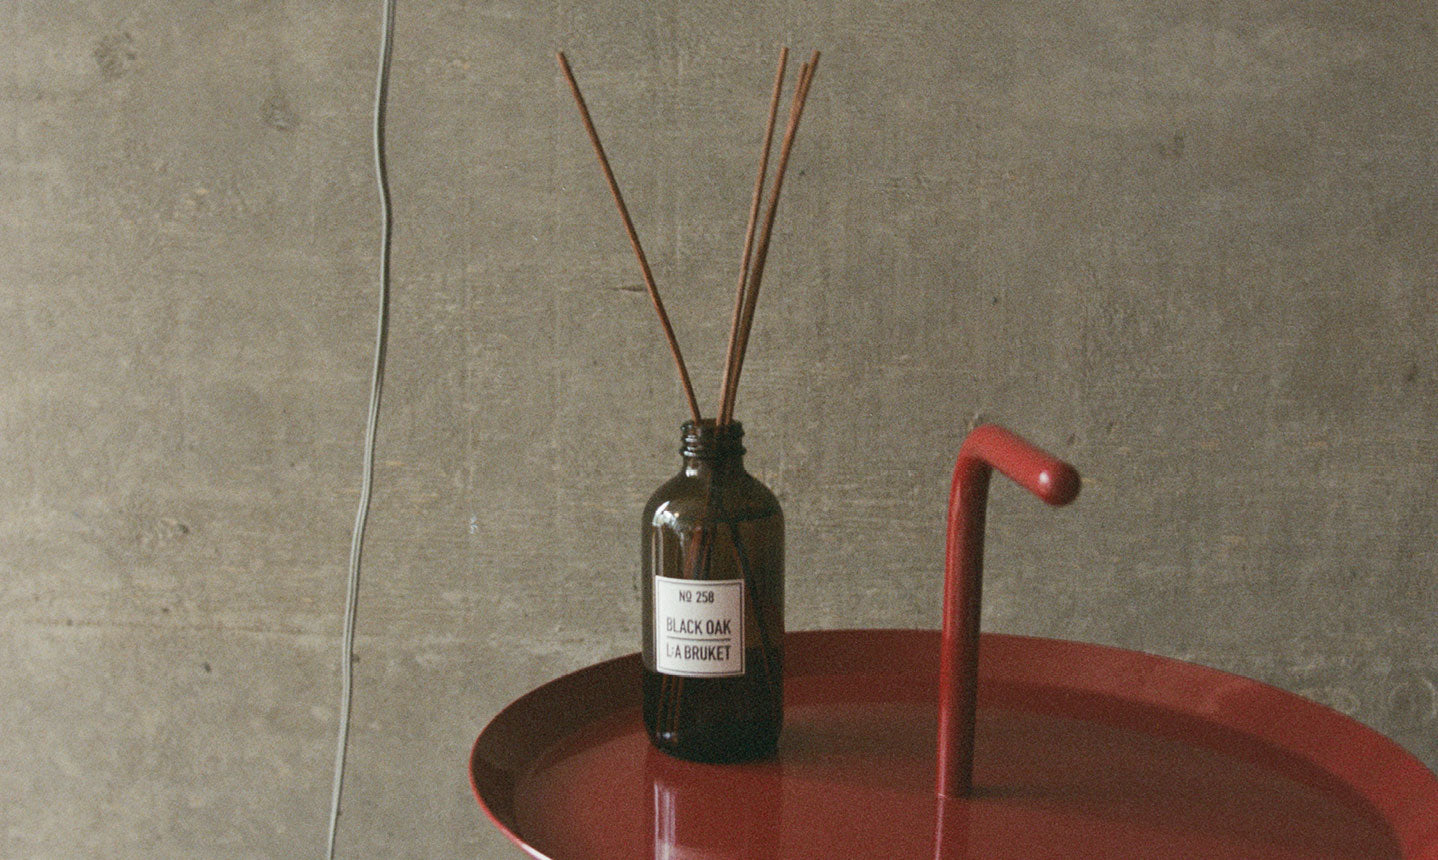 Load video: &lt;p&gt;&lt;span class=&quot;metafield-multi_line_text_field&quot;&gt;Place the stems in the soluble liquid and let them soak for a few moments. After 30 minutes, please turn the stems over without spilling the liquid. Place the bottle in a safe place, away from sunlight.&lt;/span&gt;&lt;/p&gt;